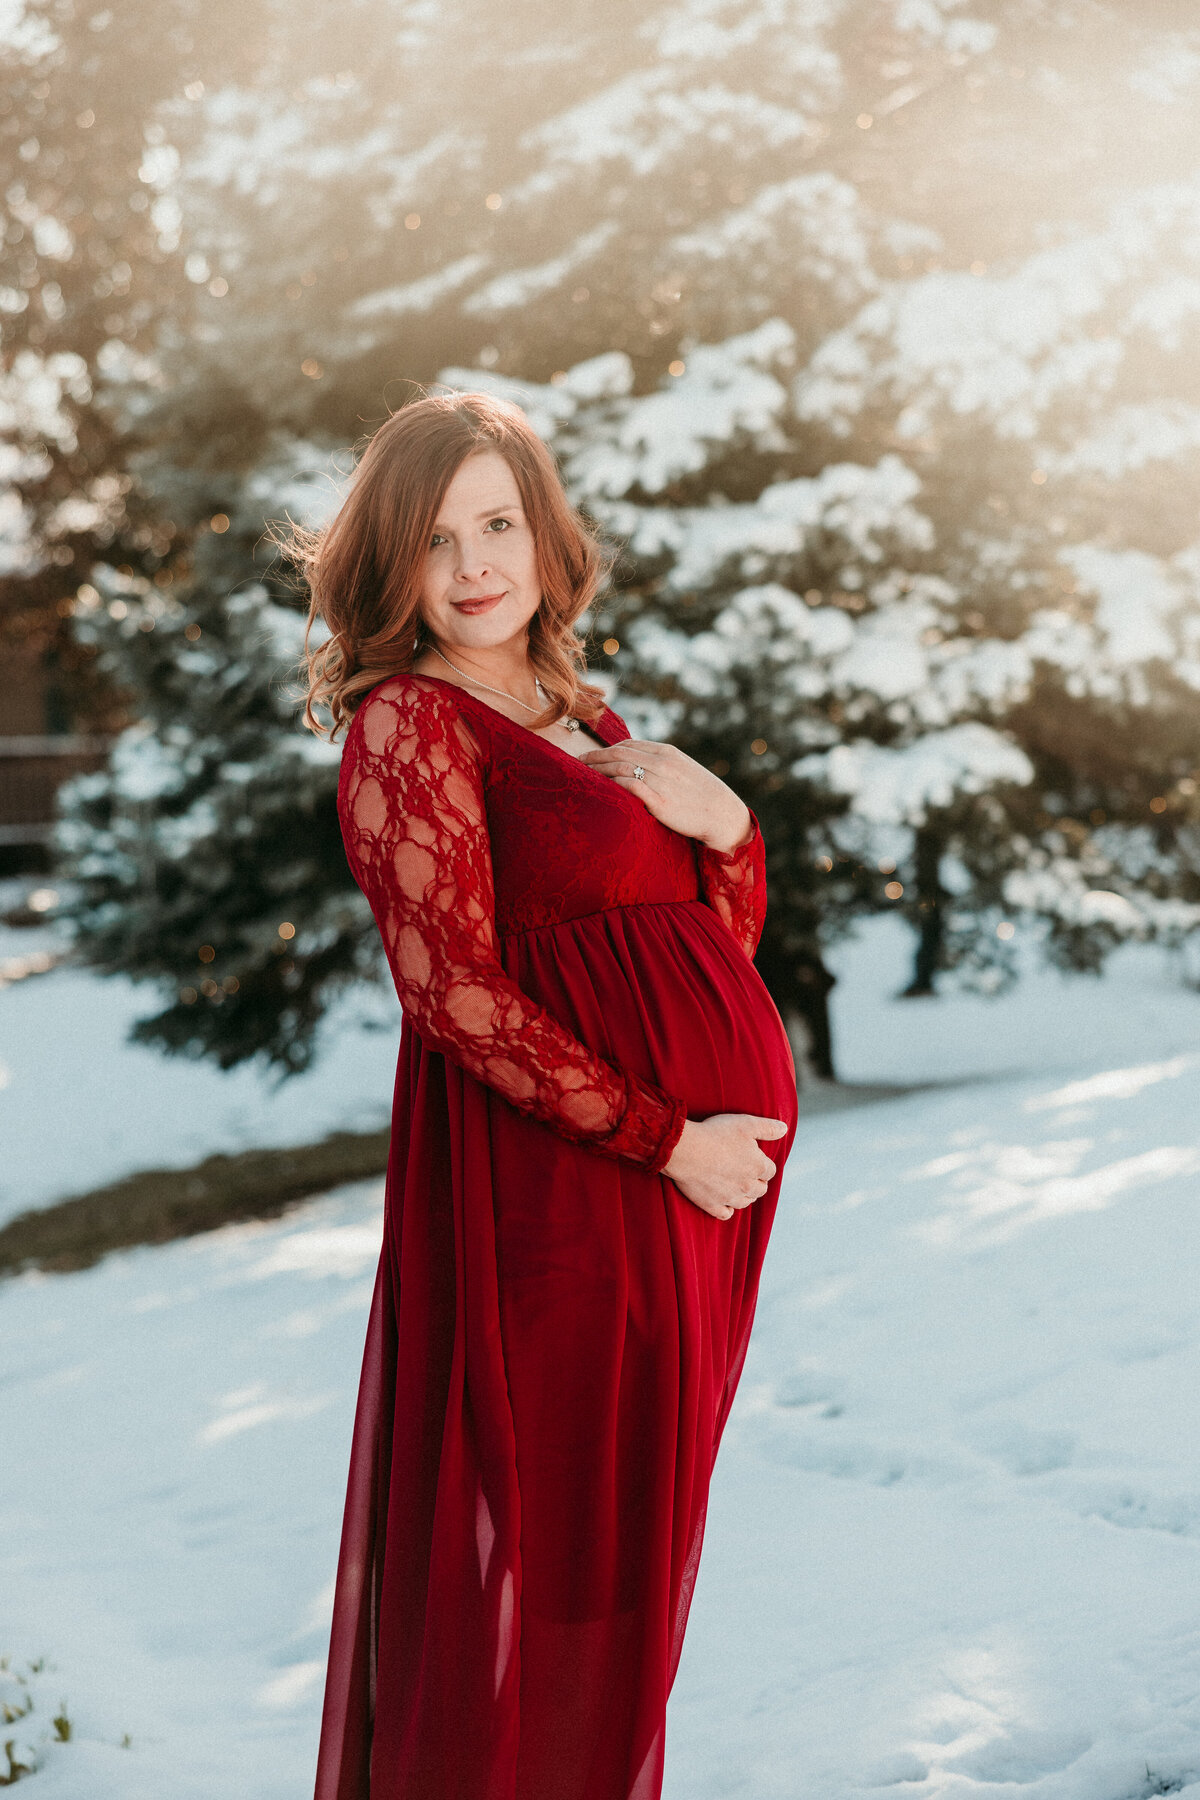 Pregnant mother poses in the snow in a small park in historic downtown St. Charles Missouri.